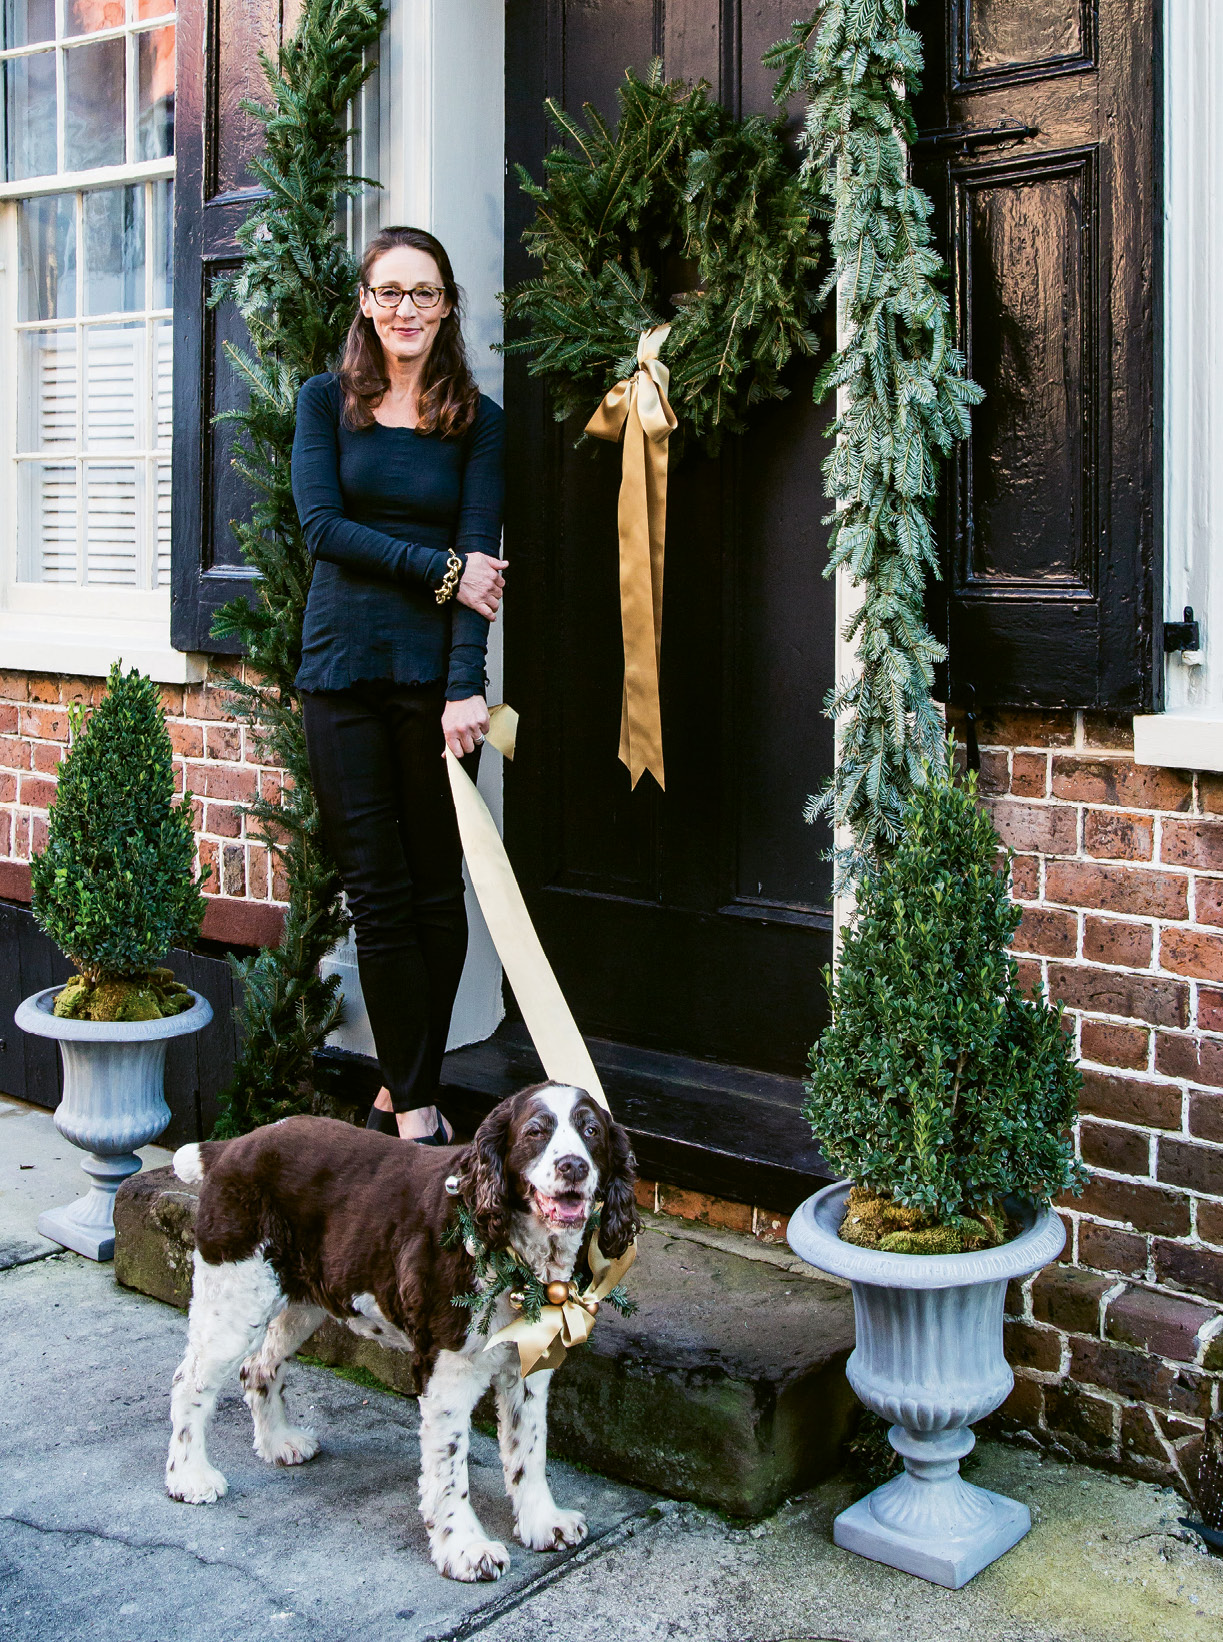 WELCOME HOME: Tara and her English springer spaniel, Georgia, greet guests as they arrive to their Tradd Street home.